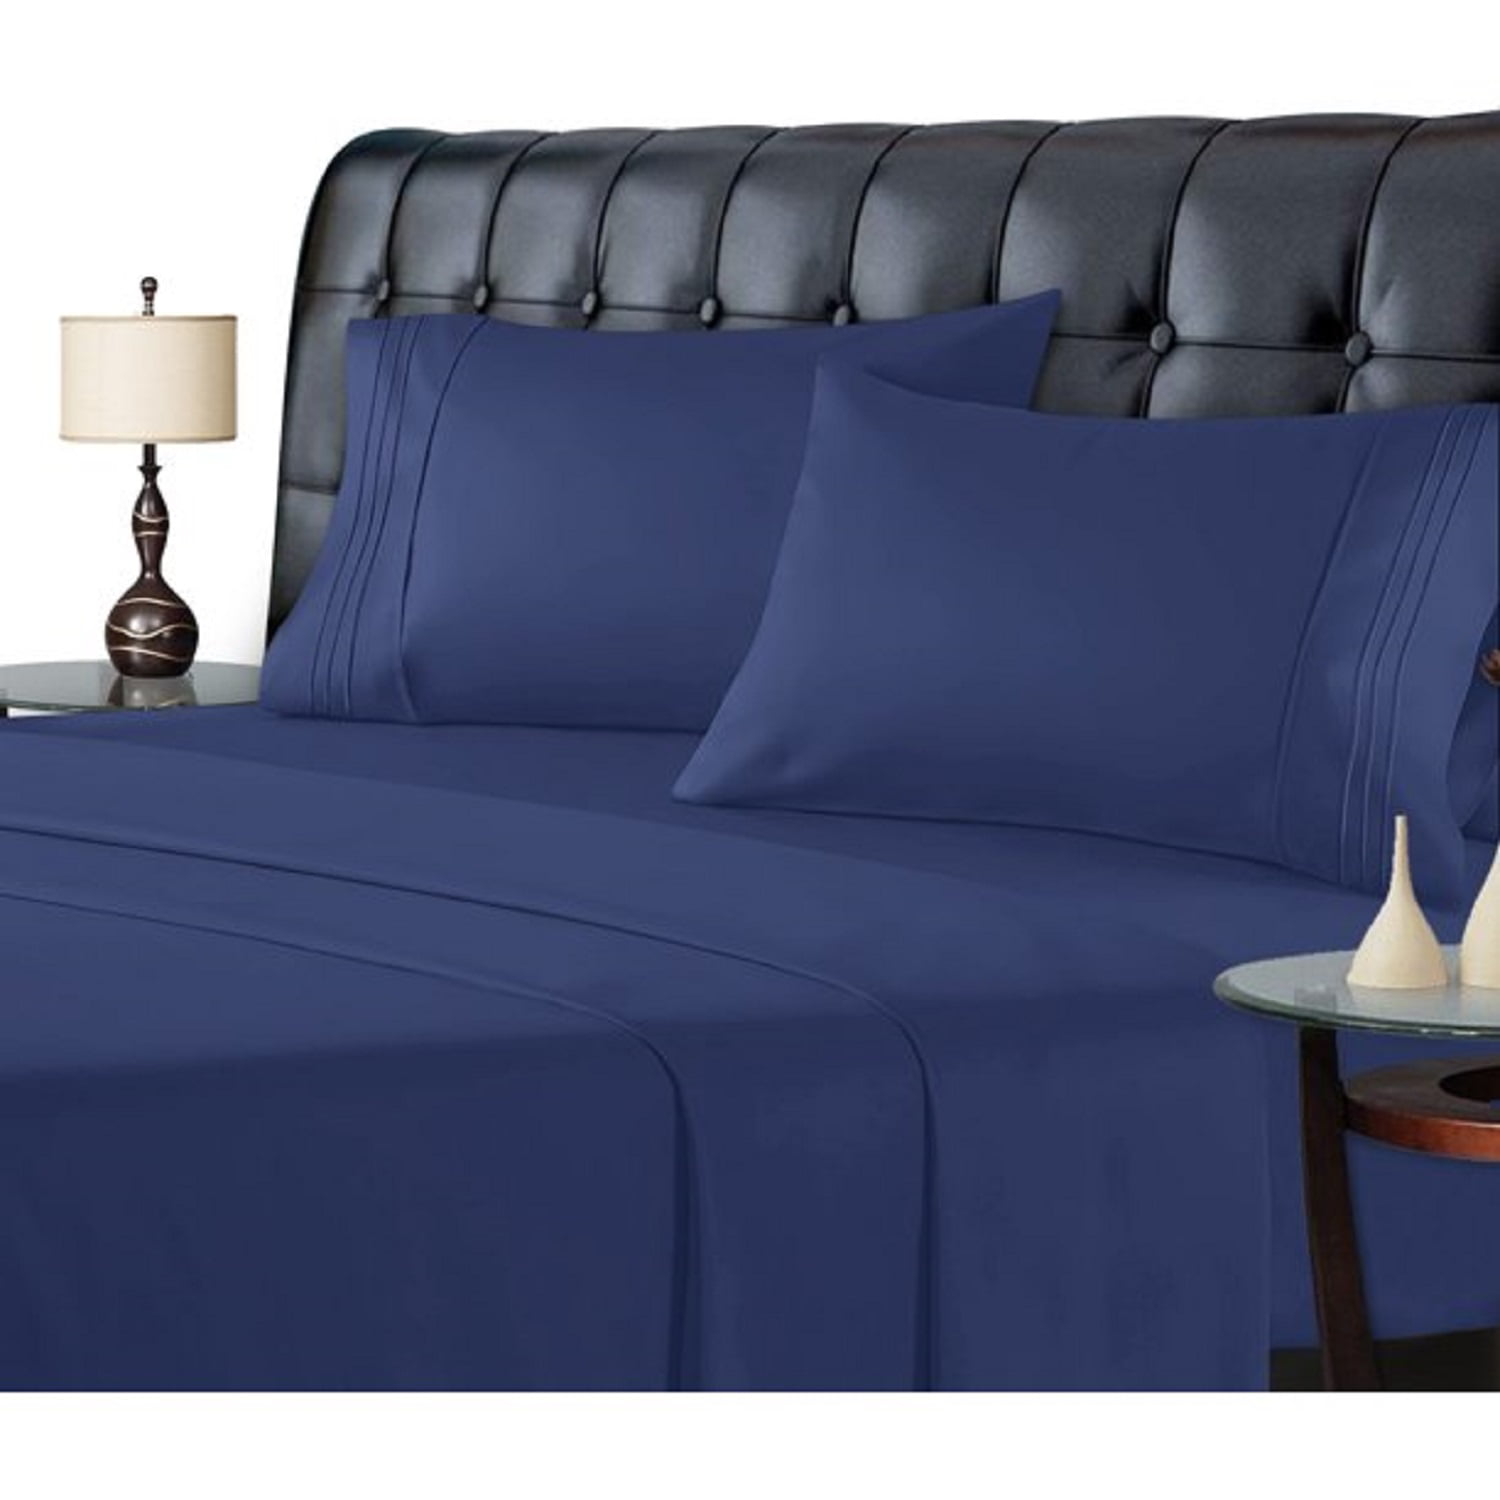 Details about   Navy Blue Queen Fitted Sheet Set With 16" DeepPocket and Set of 2 Pillow Cases 